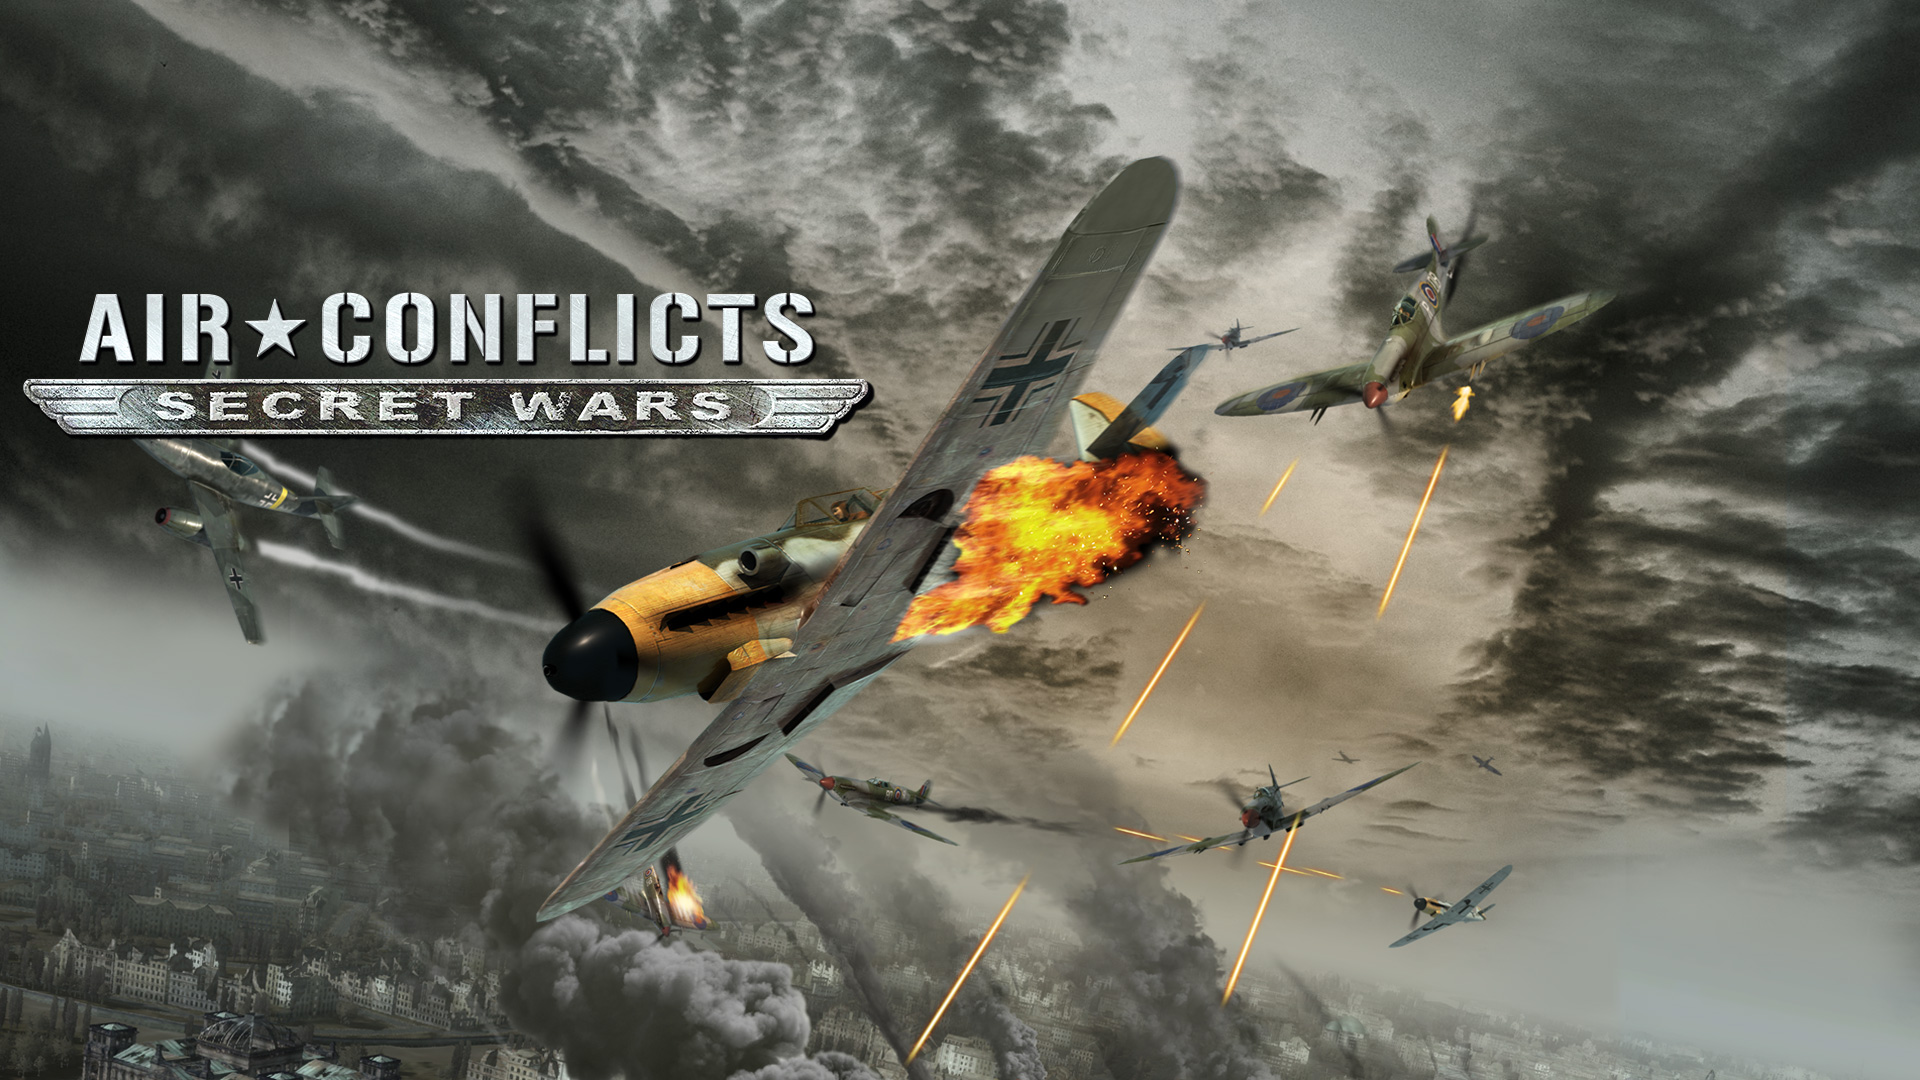 Air conflicts steam